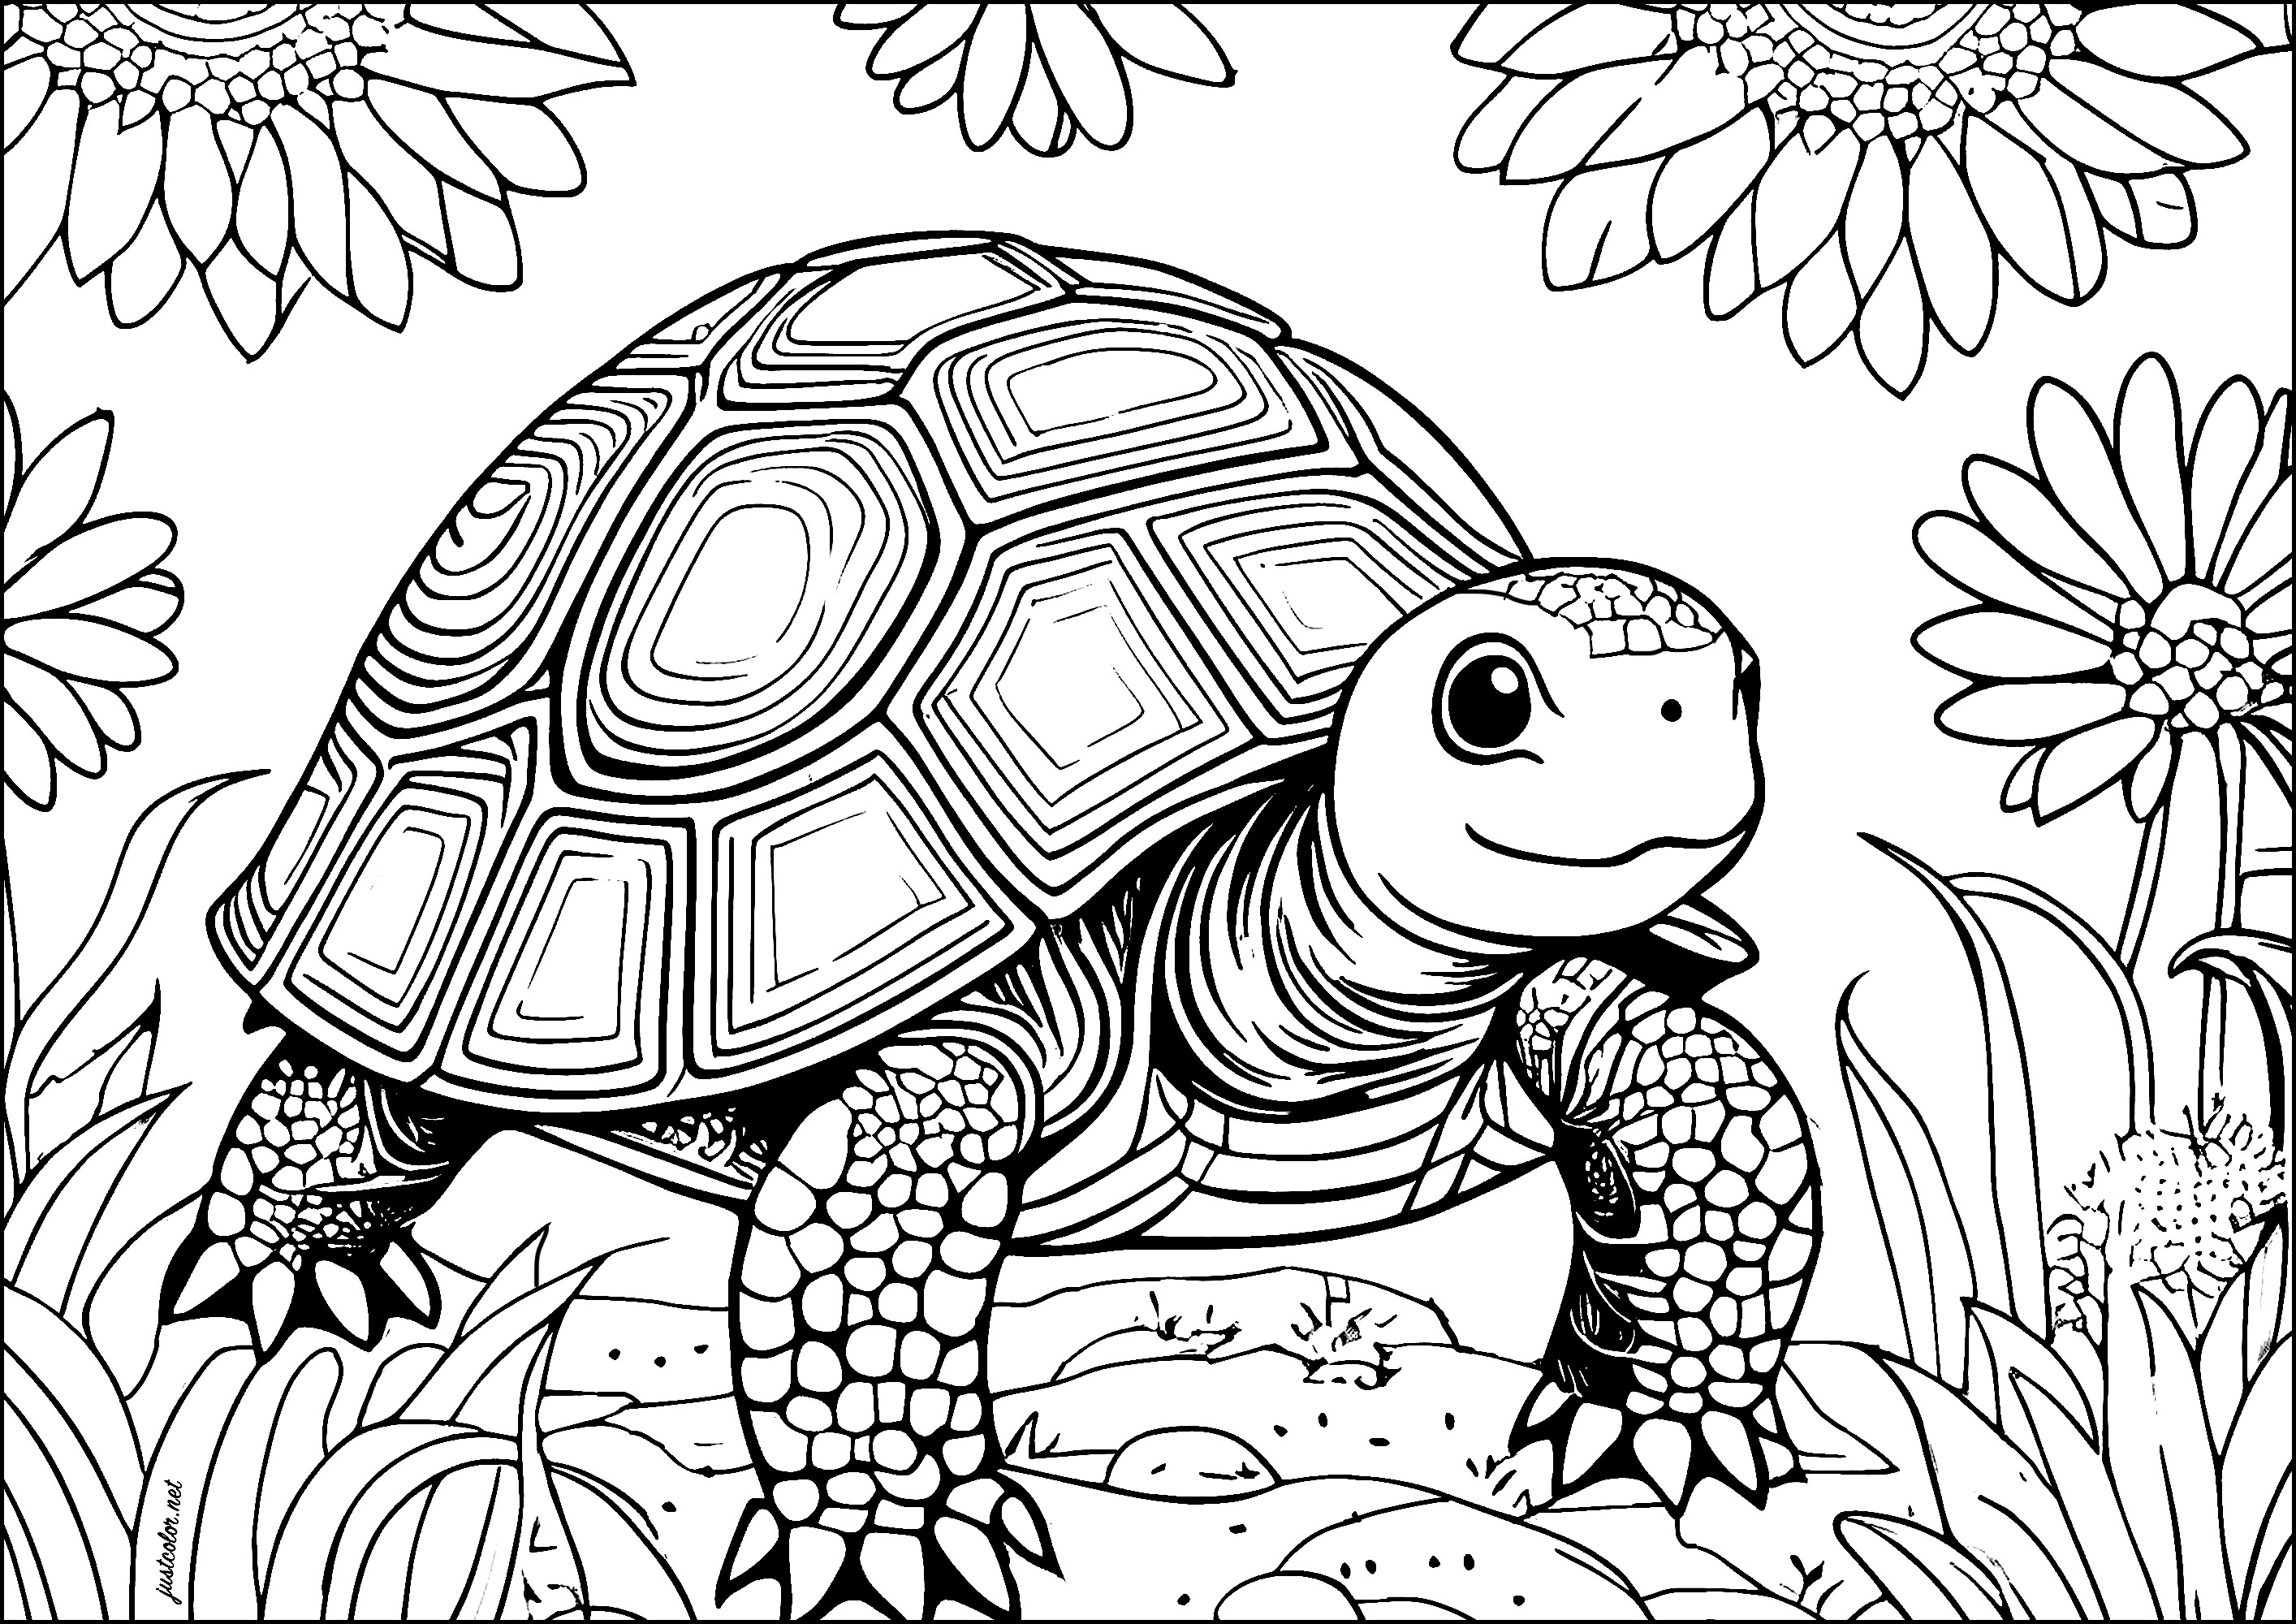 Large, pretty turtle with flowery background